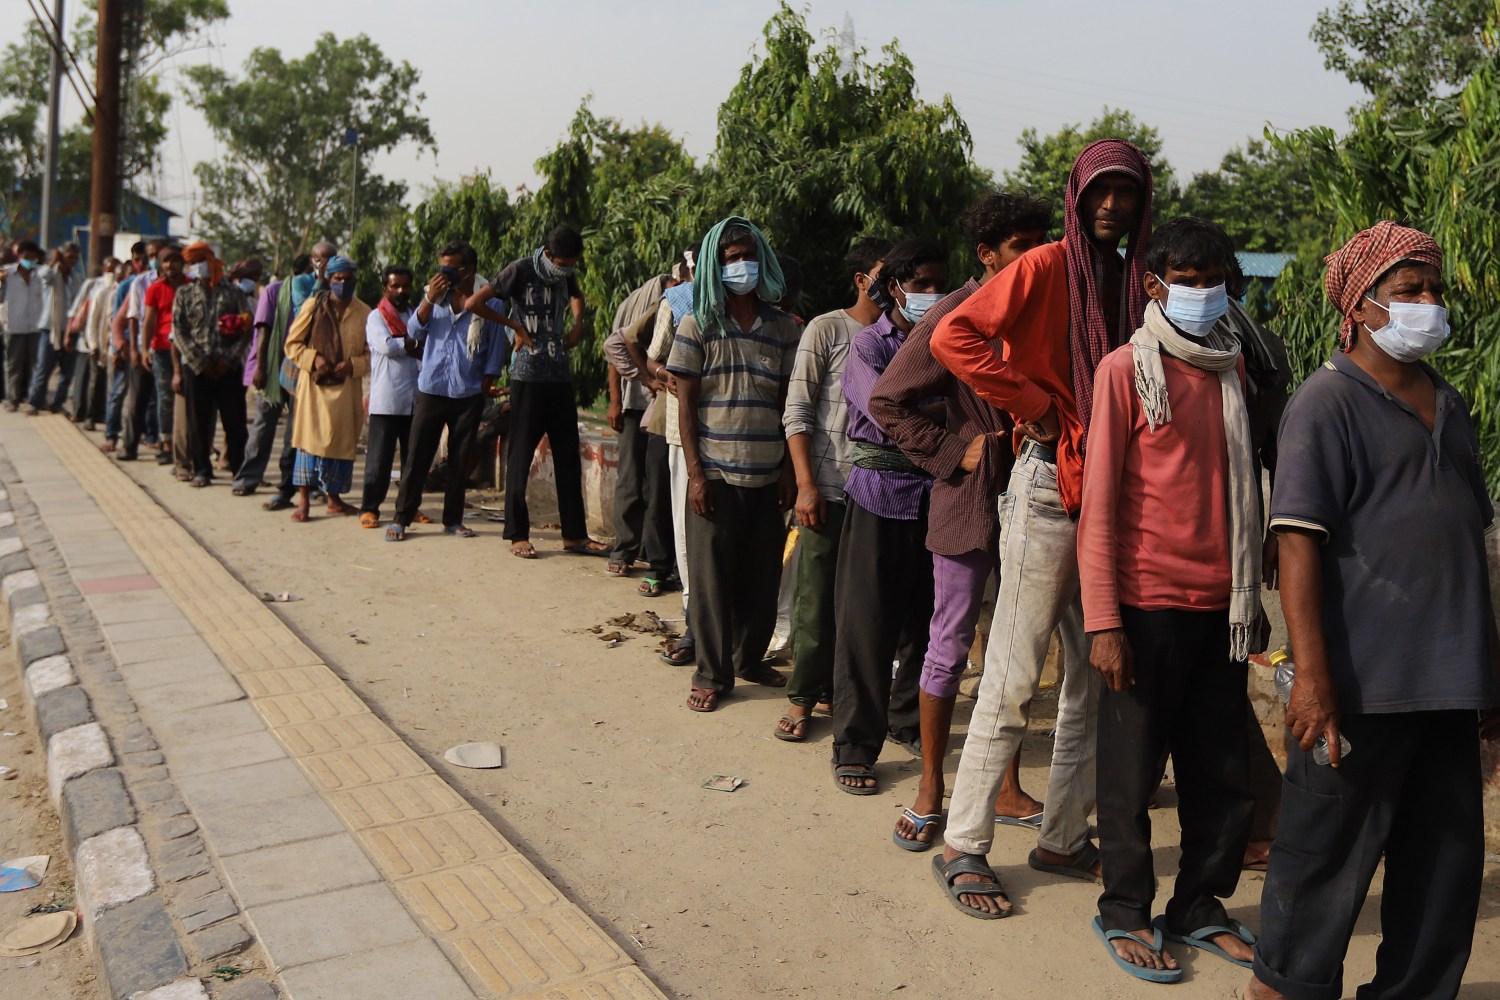 Daily wage laborers and homeless people wait in a queue to receive free food during a lockdown imposed to curb the spread of the coronavirus disease in New Delhi. (Photo by Amarjeet Kumar Singh / SOPA Images/Sipa USA)No Use Germany.